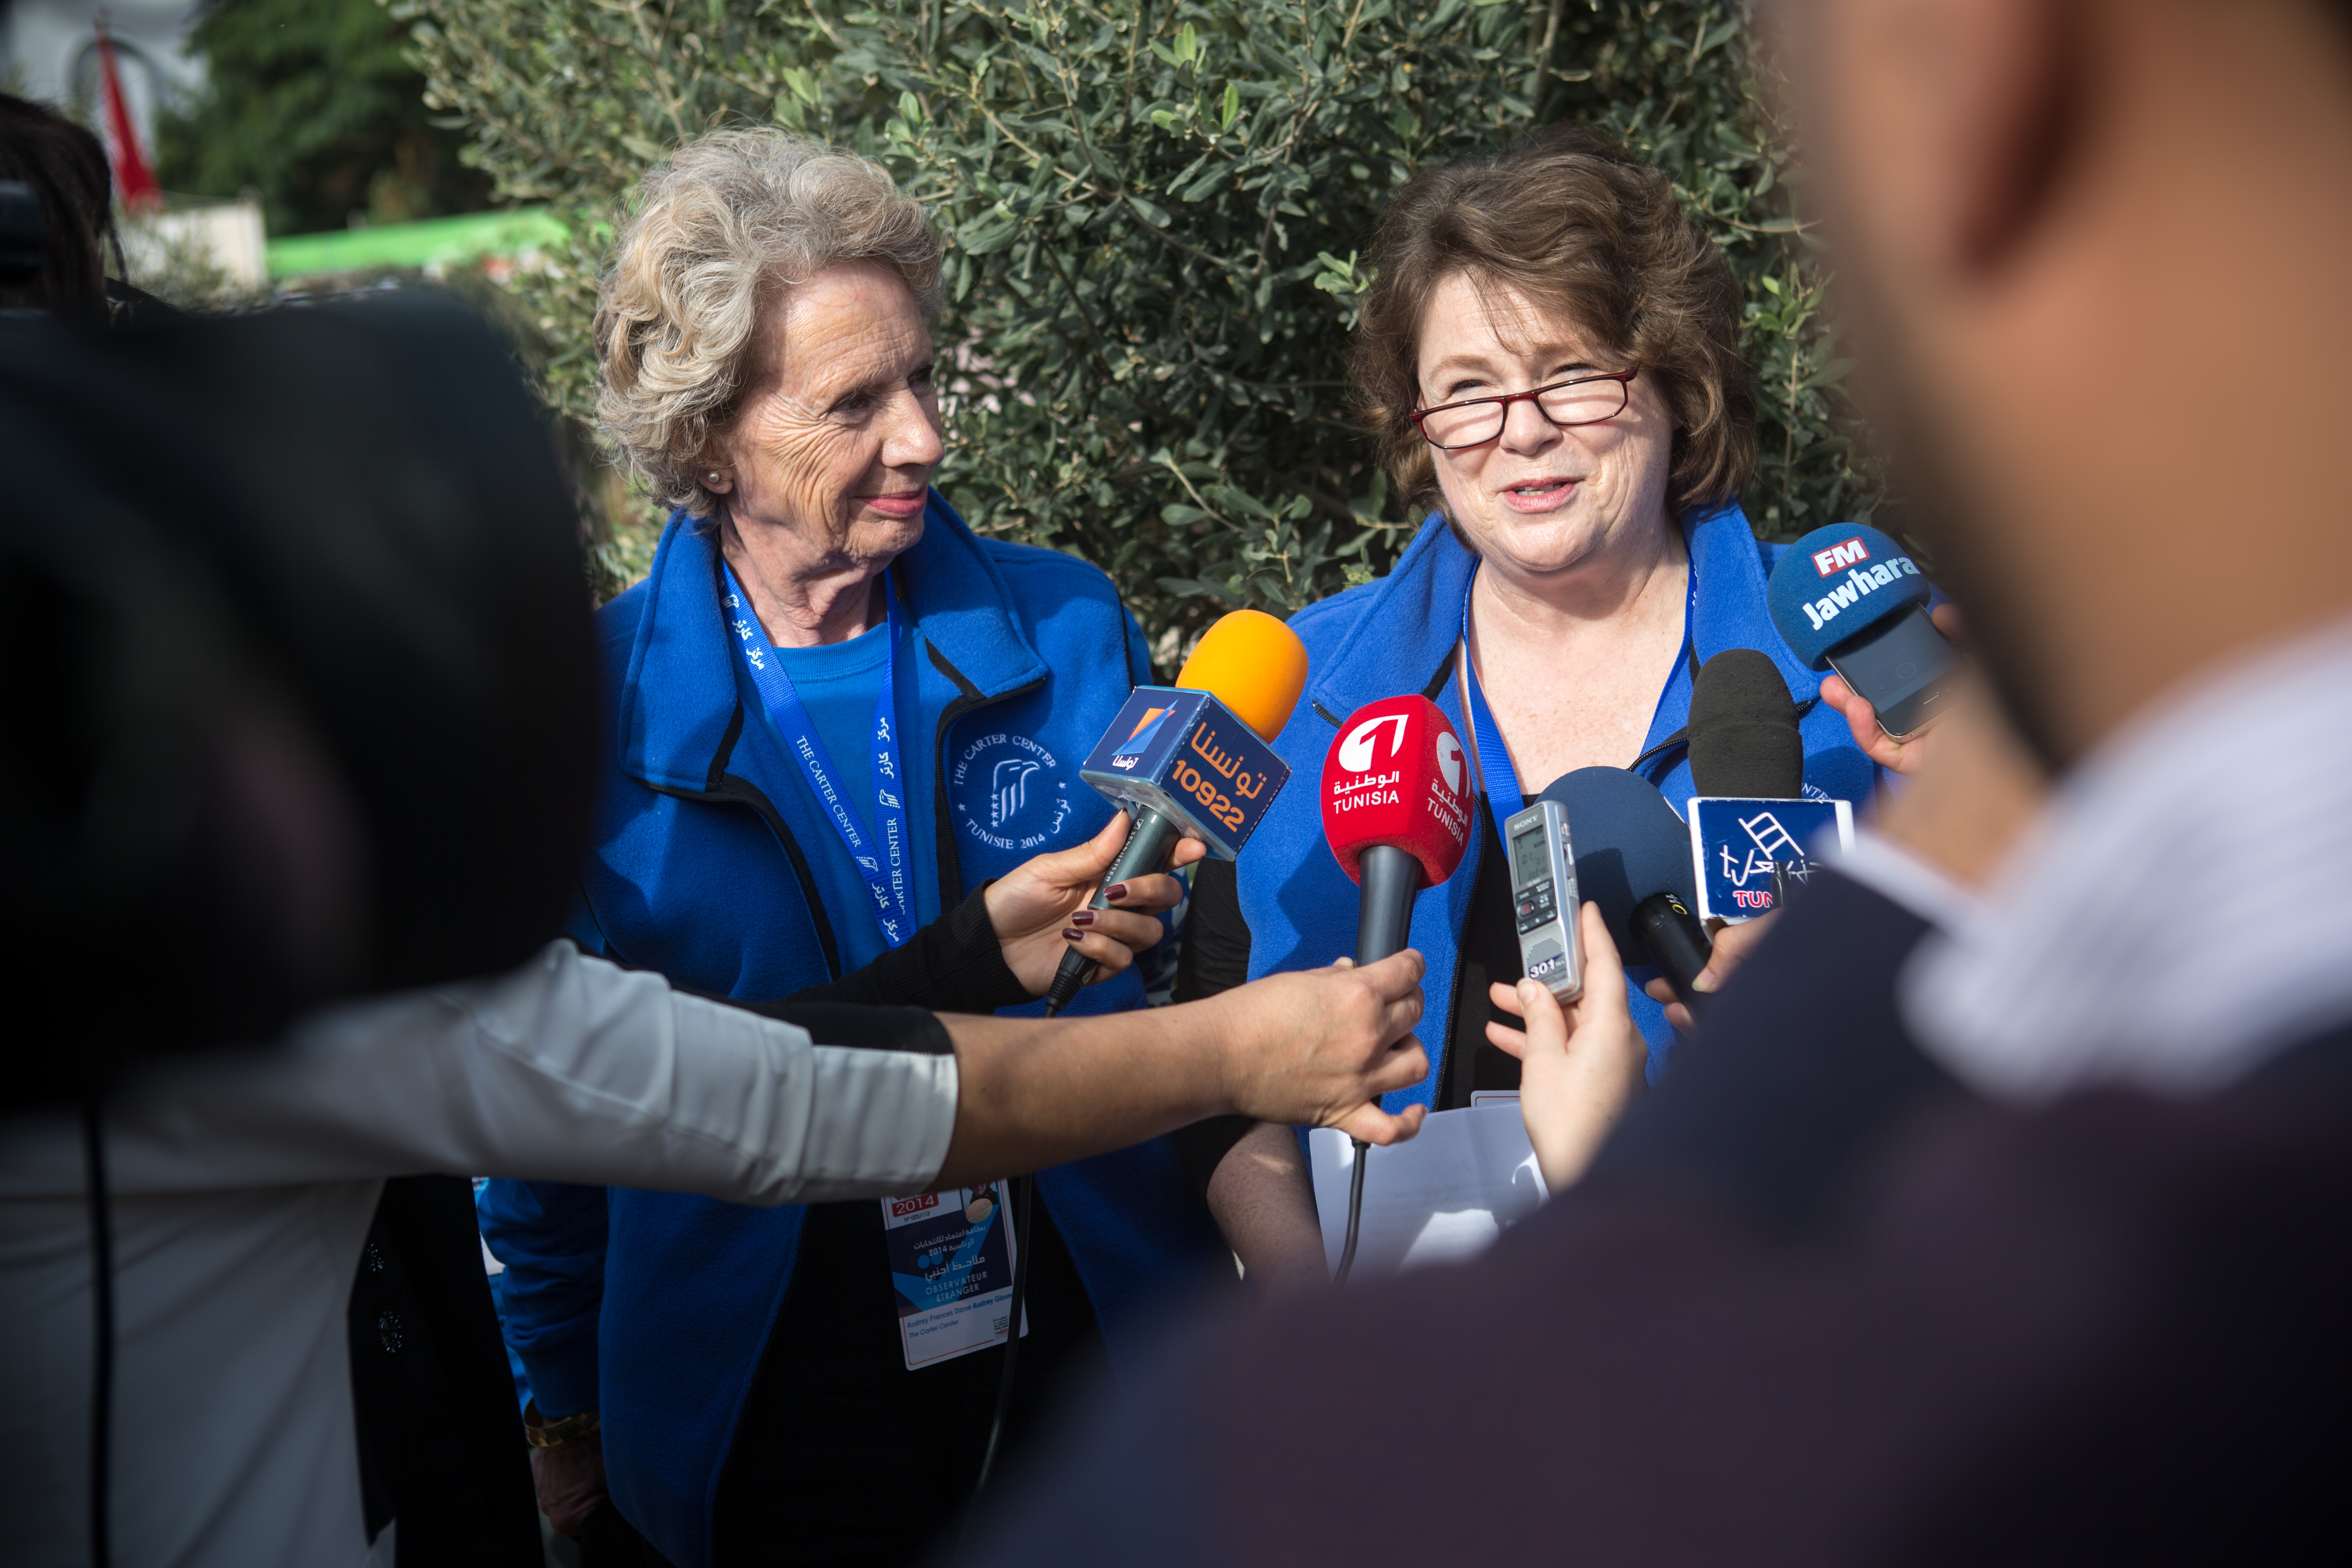 Ambassador (Ret.) Mary Ann Peters, Carter Center CEO, briefs Tunisian and international media about the Center's observation delegation at a polling center in Tunis early on election day. Next to her is co-leader Amb. Audrey Glover of the United Kingdom. The Center deployed about 80 international observers to all 27 constituencies in Tunis.